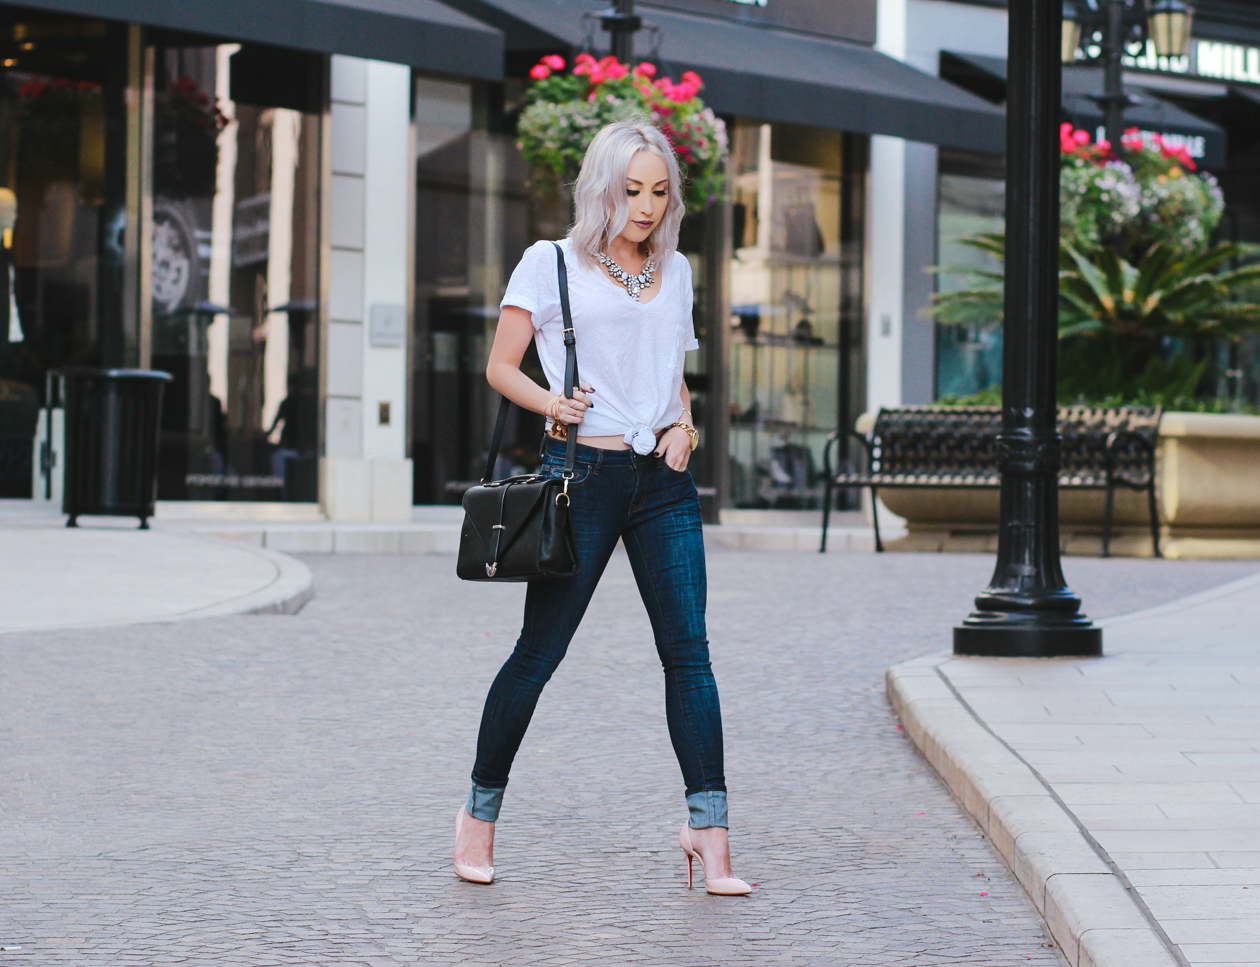 Jeans & a simple white tee on Rodeo Drive | BlondieintheCity.com